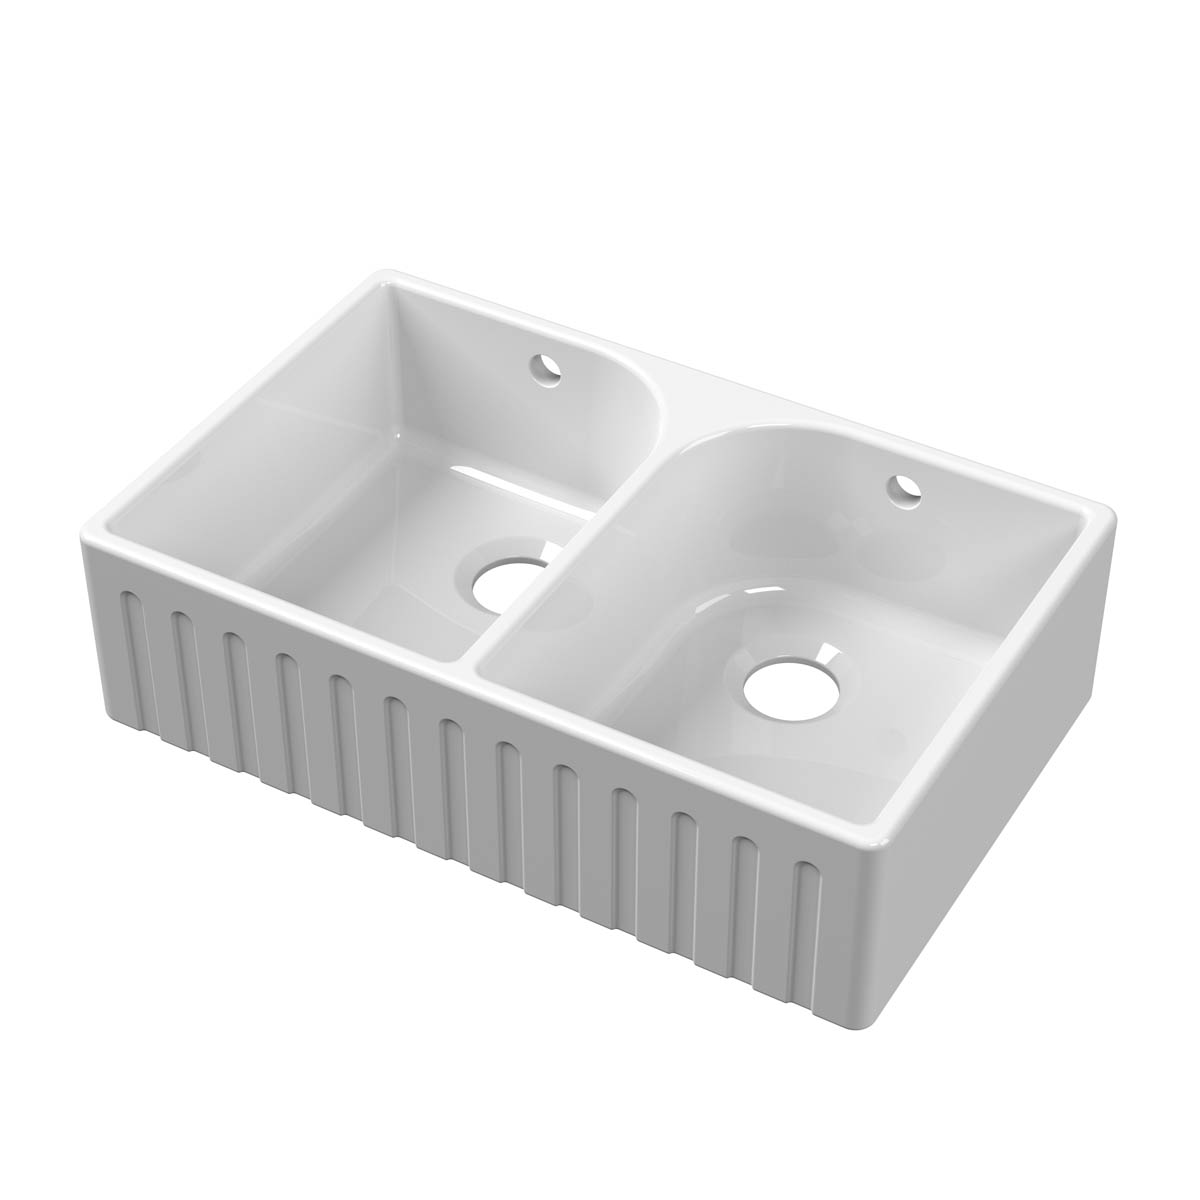 Nuie Fluted Butler Double Bowl 795x500x220mm Fireclay Sink with Full Weir & Overflow - White (20294)